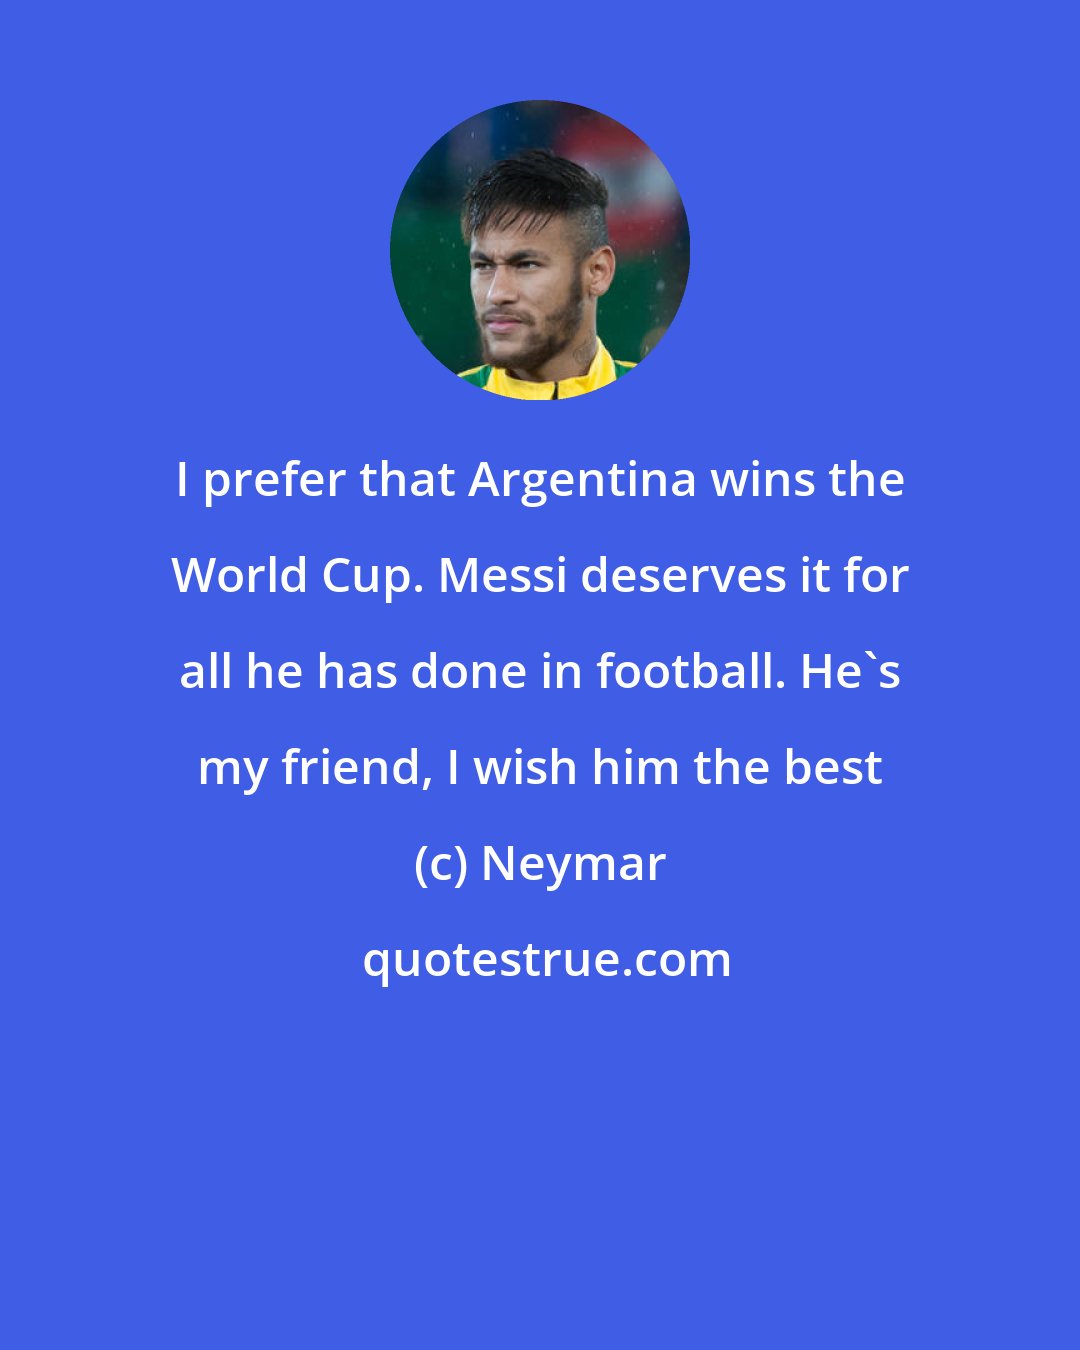 Neymar: I prefer that Argentina wins the World Cup. Messi deserves it for all he has done in football. He's my friend, I wish him the best